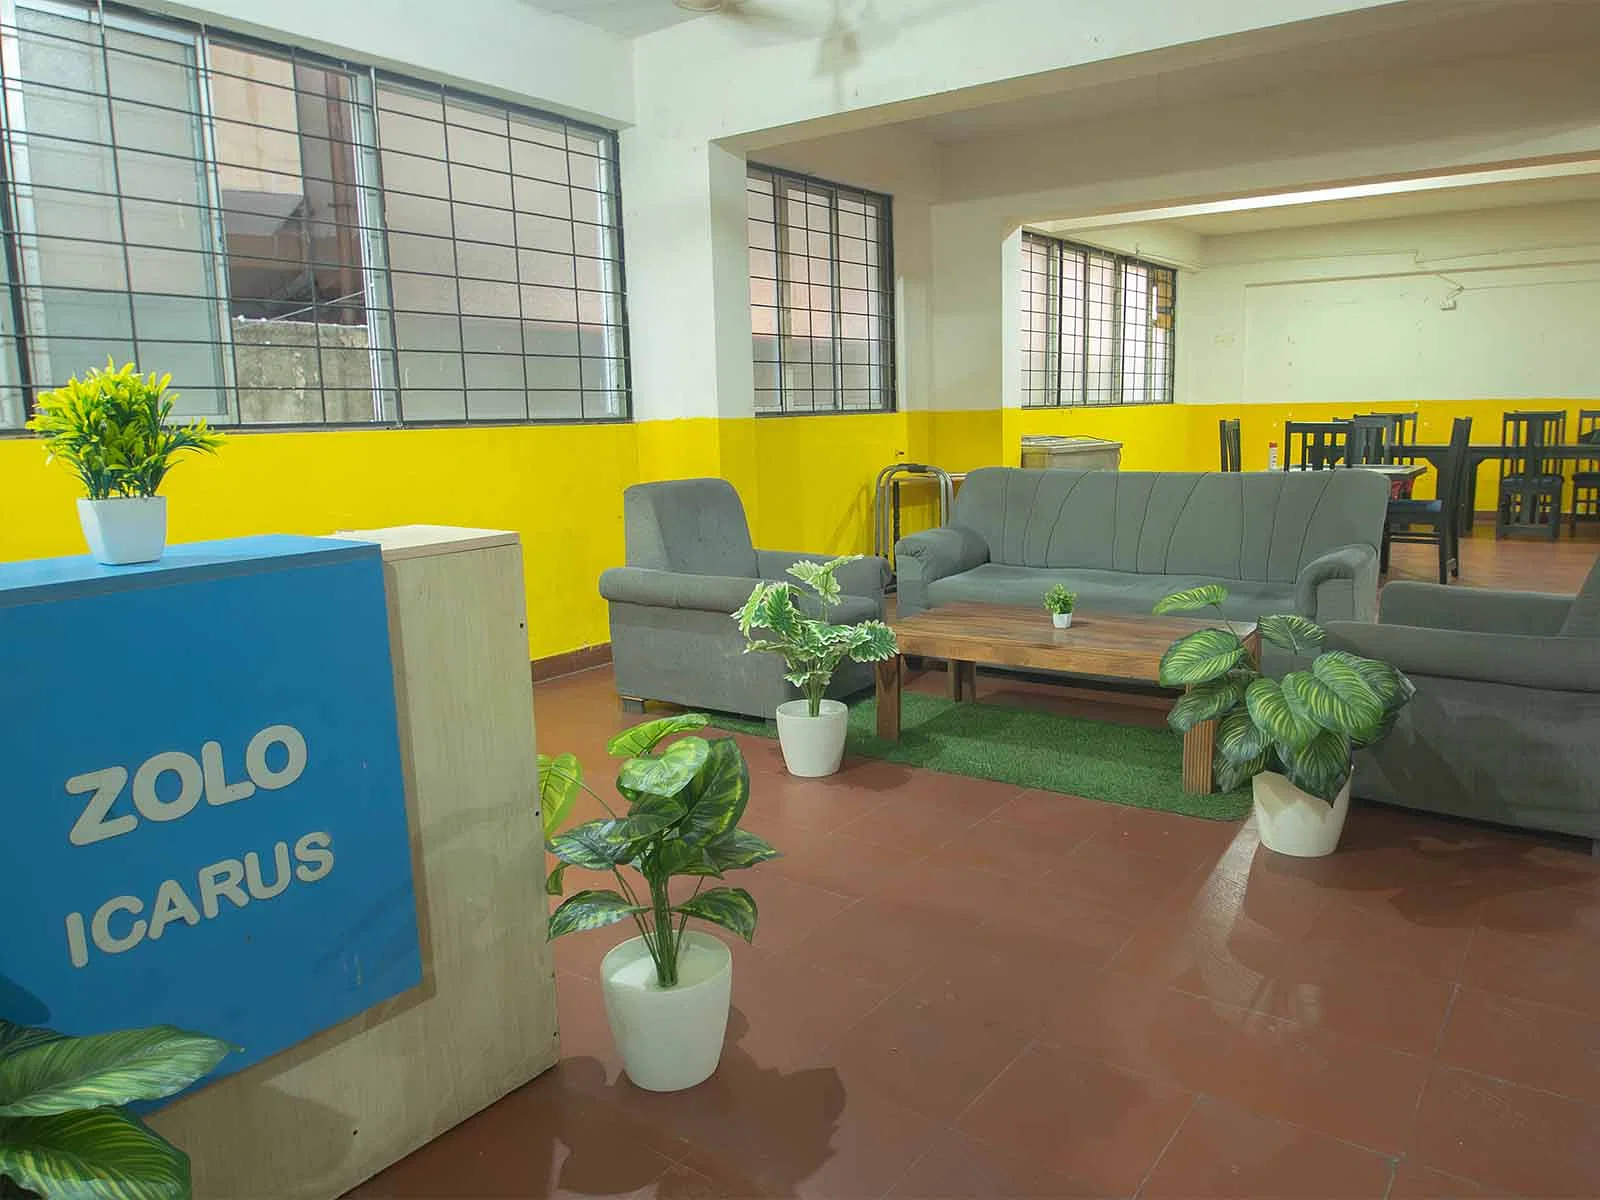 fully furnished Zolo single rooms for rent near me-check out now-Zolo Icarus